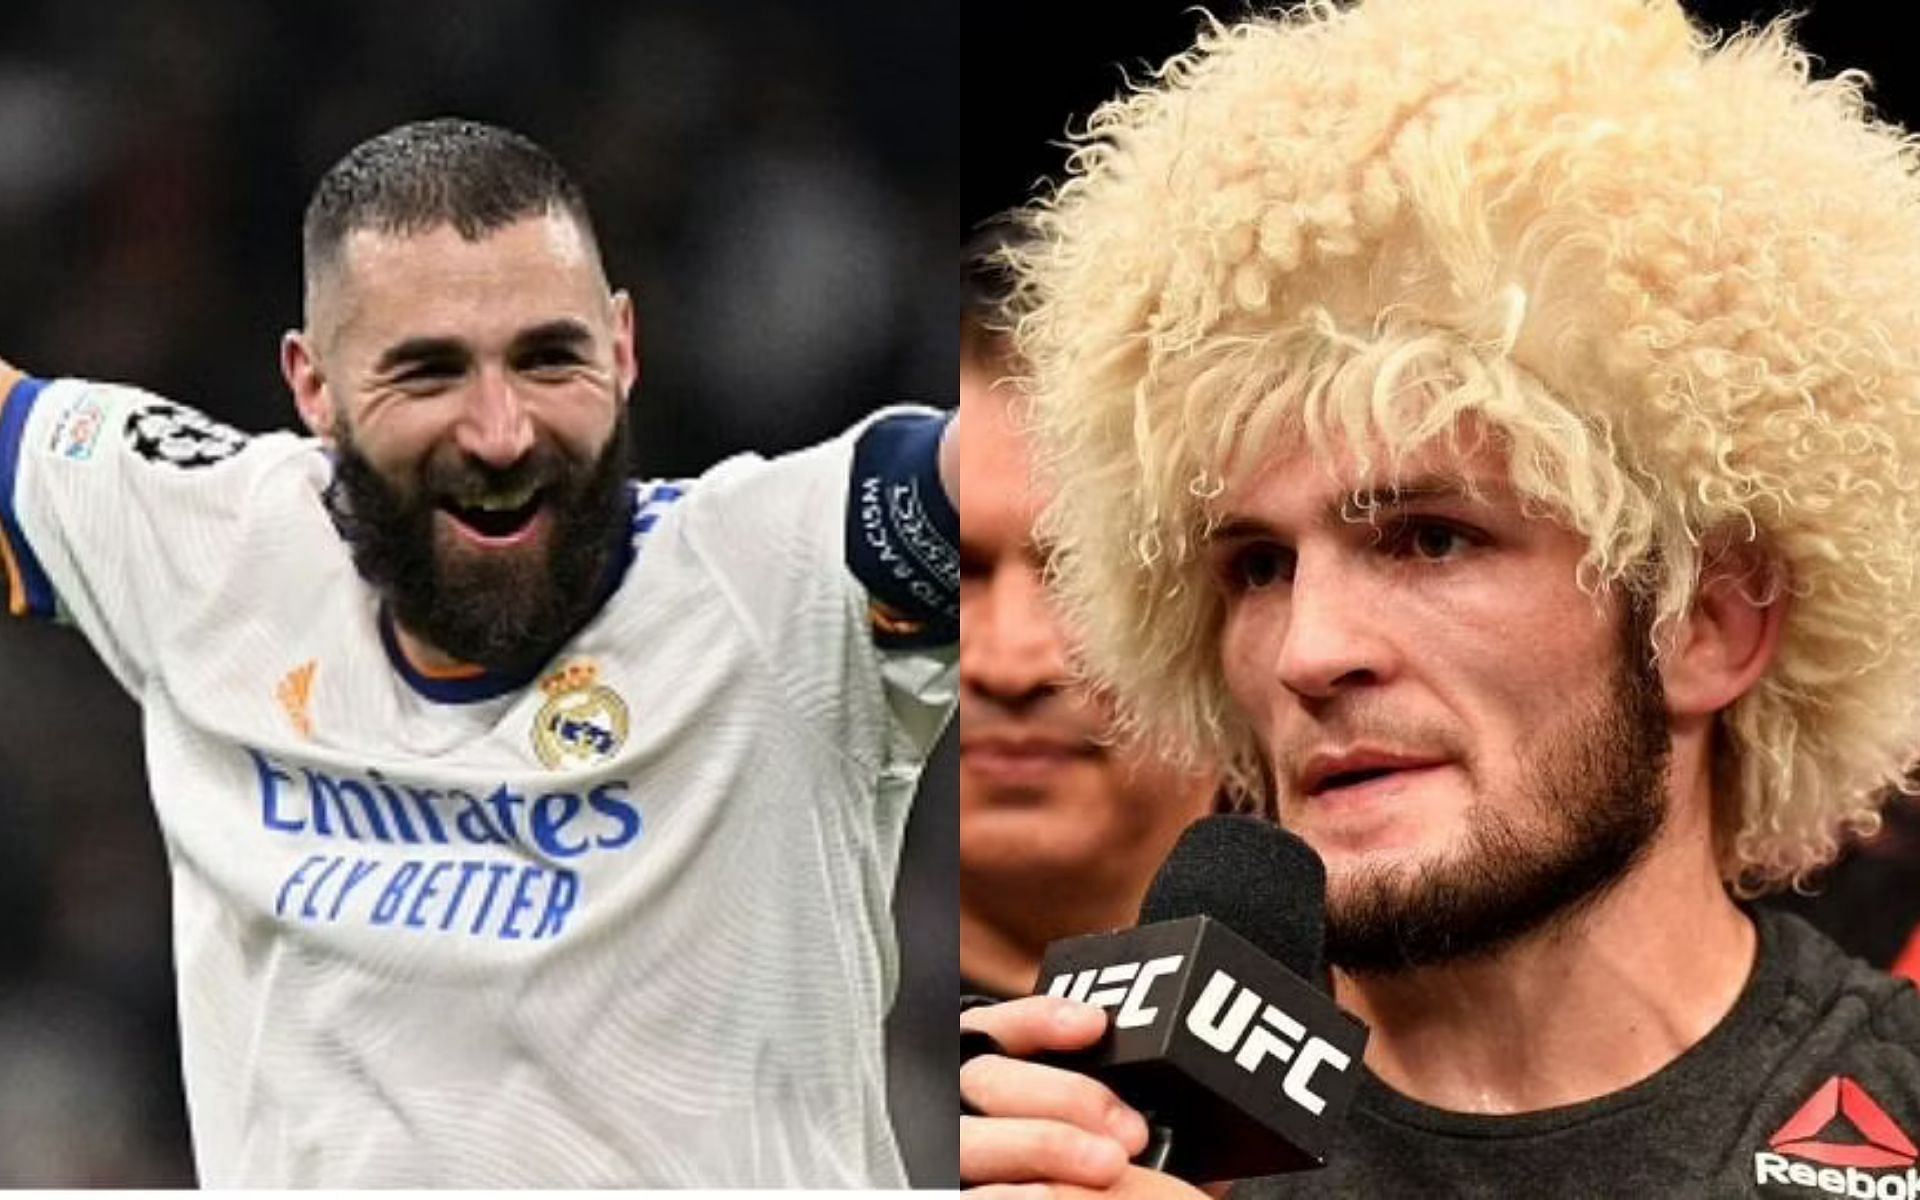 “Best game of your life” – Khabib Nurmagomedov sends message to Karim Benzema following latter’s hat-trick for Real Madrid 